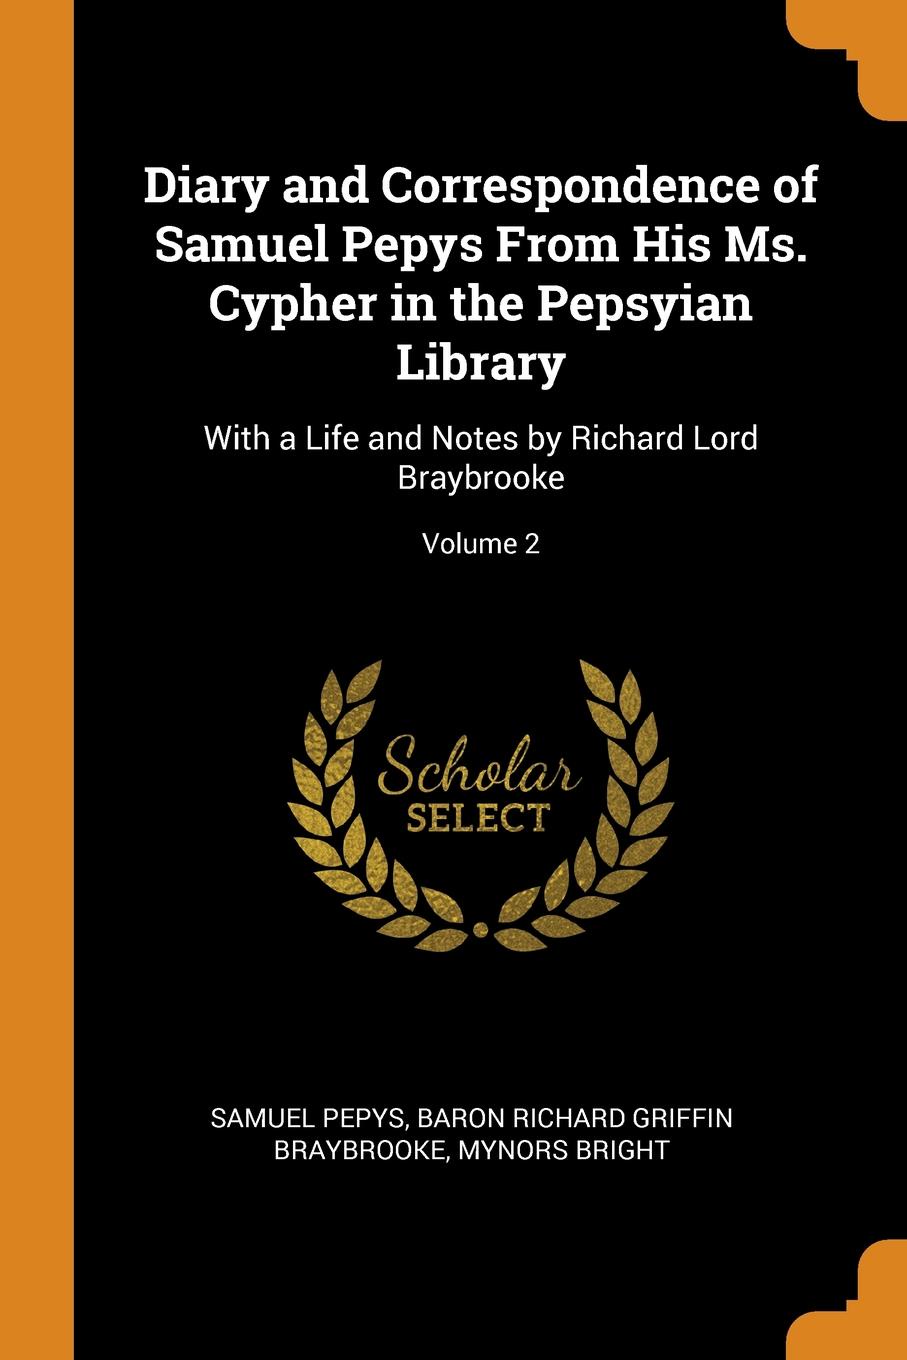 Diary and Correspondence of Samuel Pepys From His Ms. Cypher in the Pepsyian Library. With a Life and Notes by Richard Lord Braybrooke; Volume 2